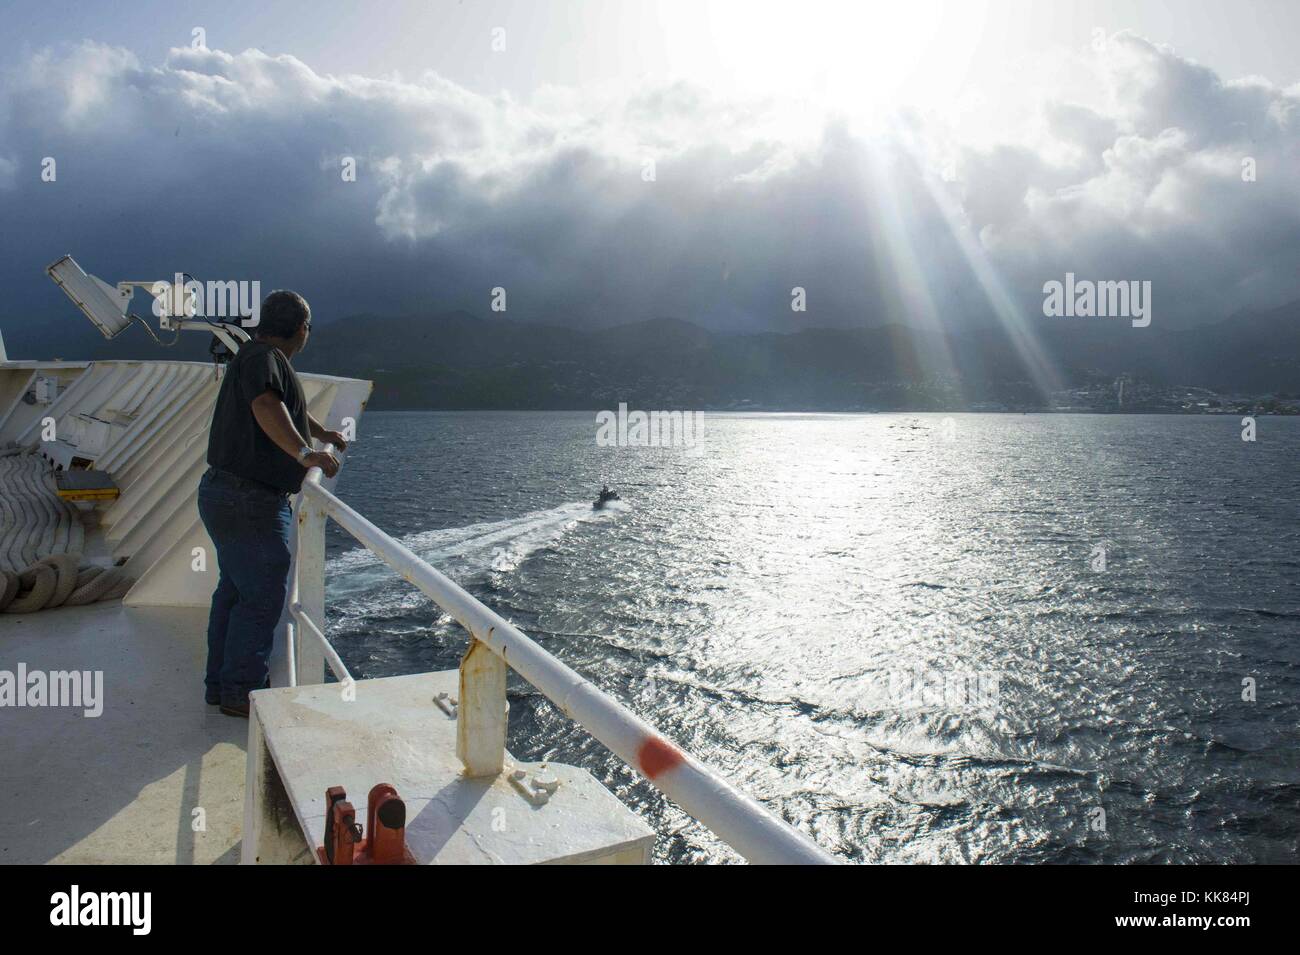 Deck mechanic Donald Rodriguez, a Military Sealift Command civil service mariner, watches as the hospital ship USNS Comfort T-AH 20 arrives in Roseau, Dominica during Continuing Promise 2015, Roseau, Dominica. Image courtesy Mass Communication Specialist 2nd Class Brittney Cannady/US Navy, 2015. Stock Photo